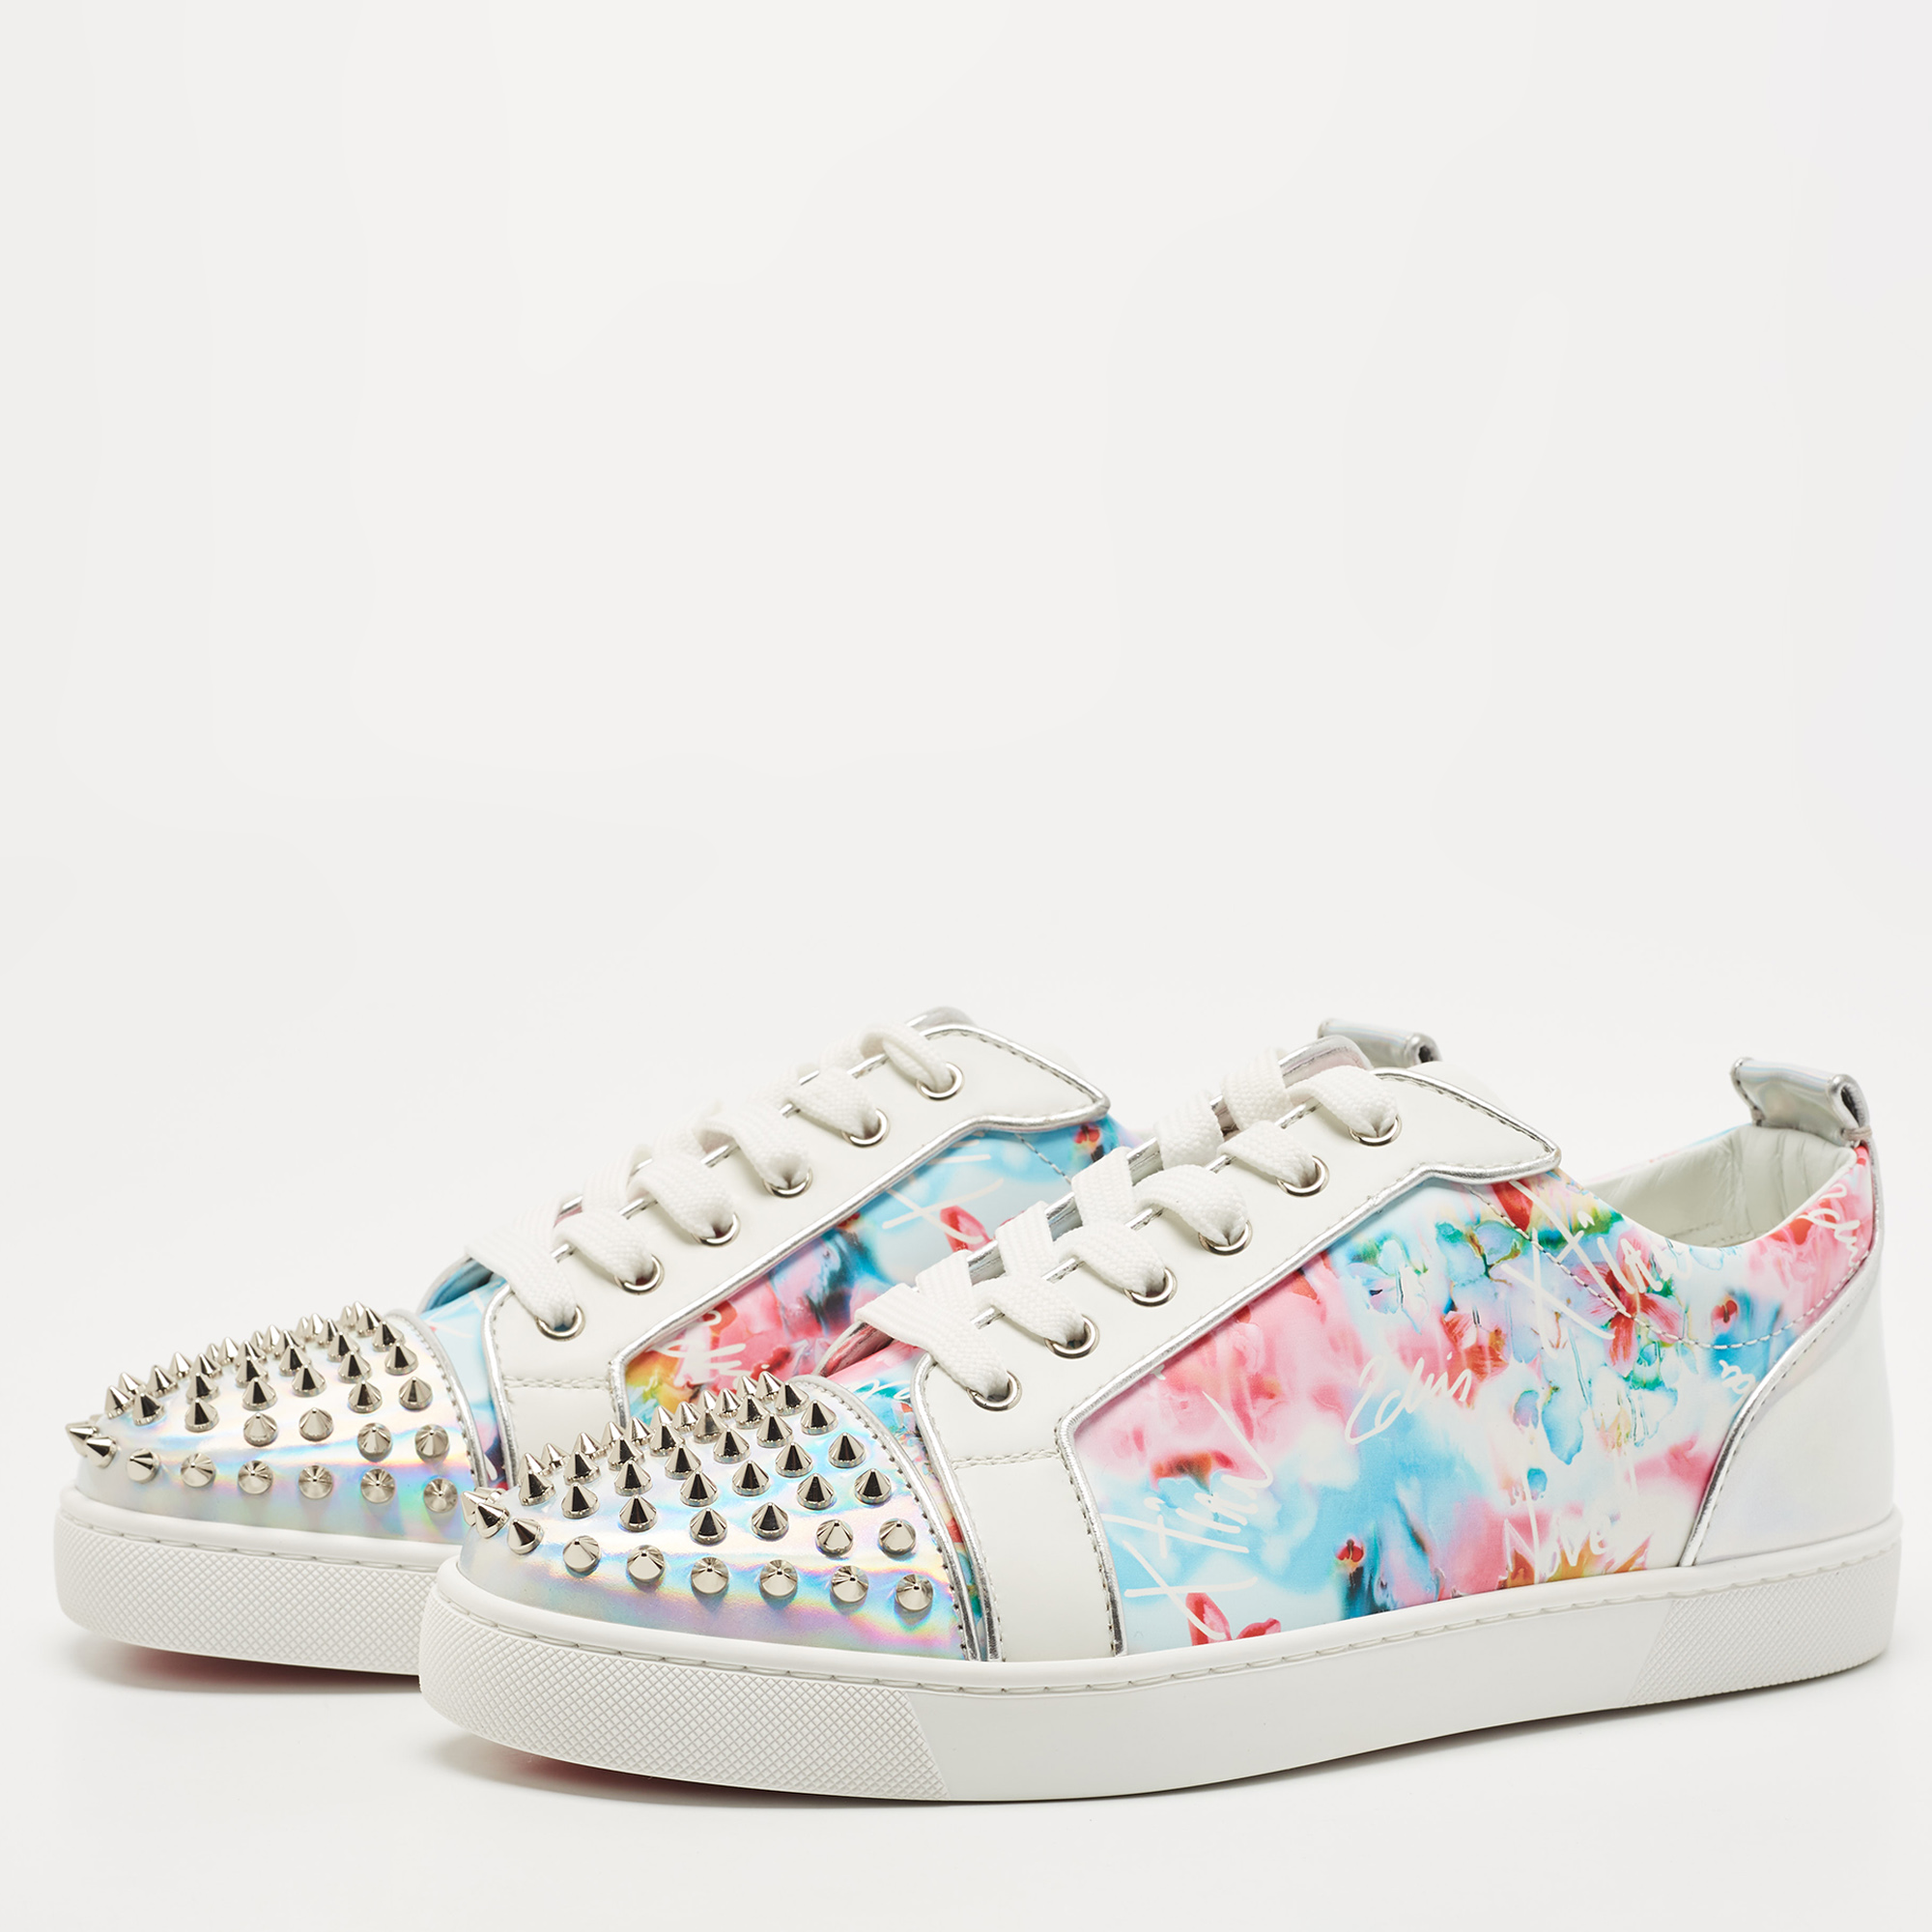 

Christian Louboutin Multicolor Floral Print Leather and Laminated Leather Louis Spike Junior Low Top Sneakers Size